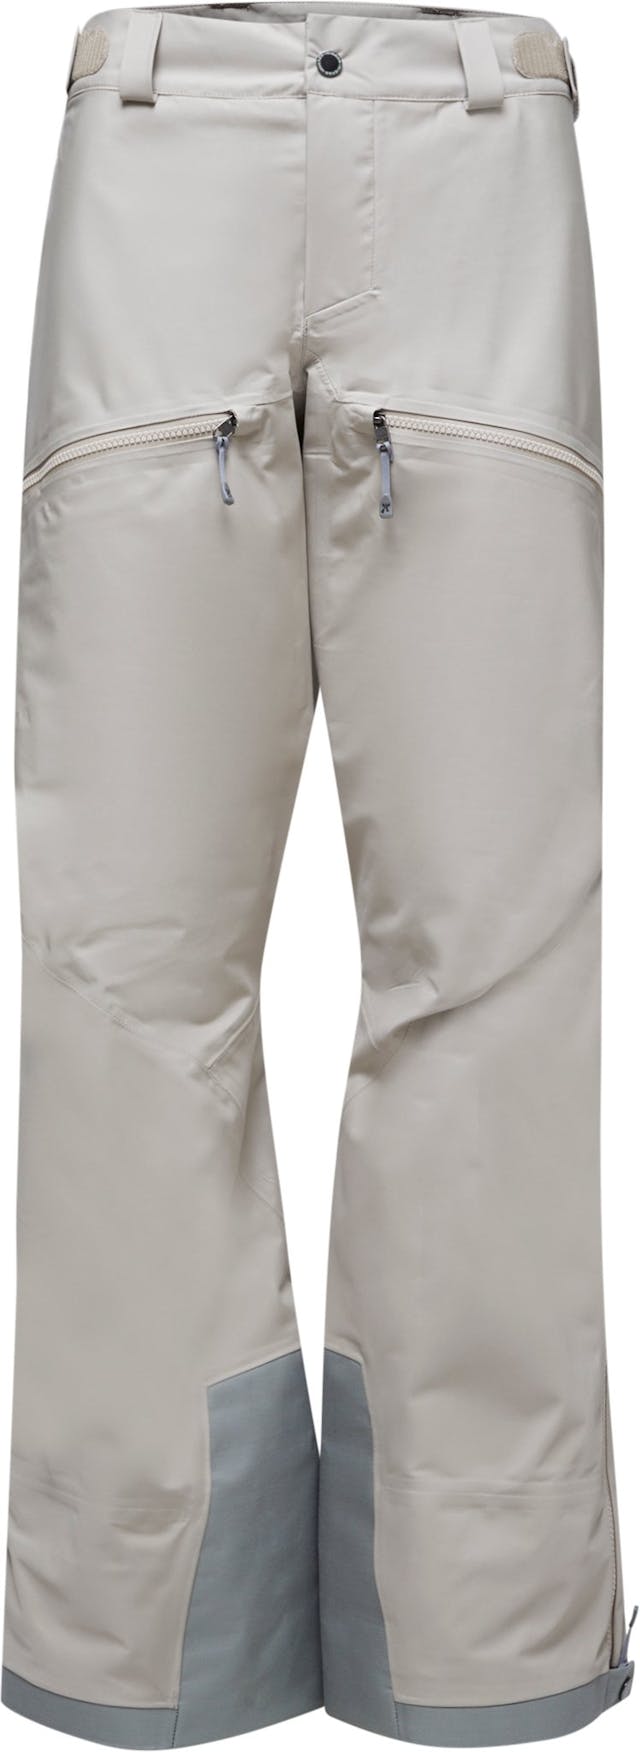 Product image for Purpose Pants - Women's